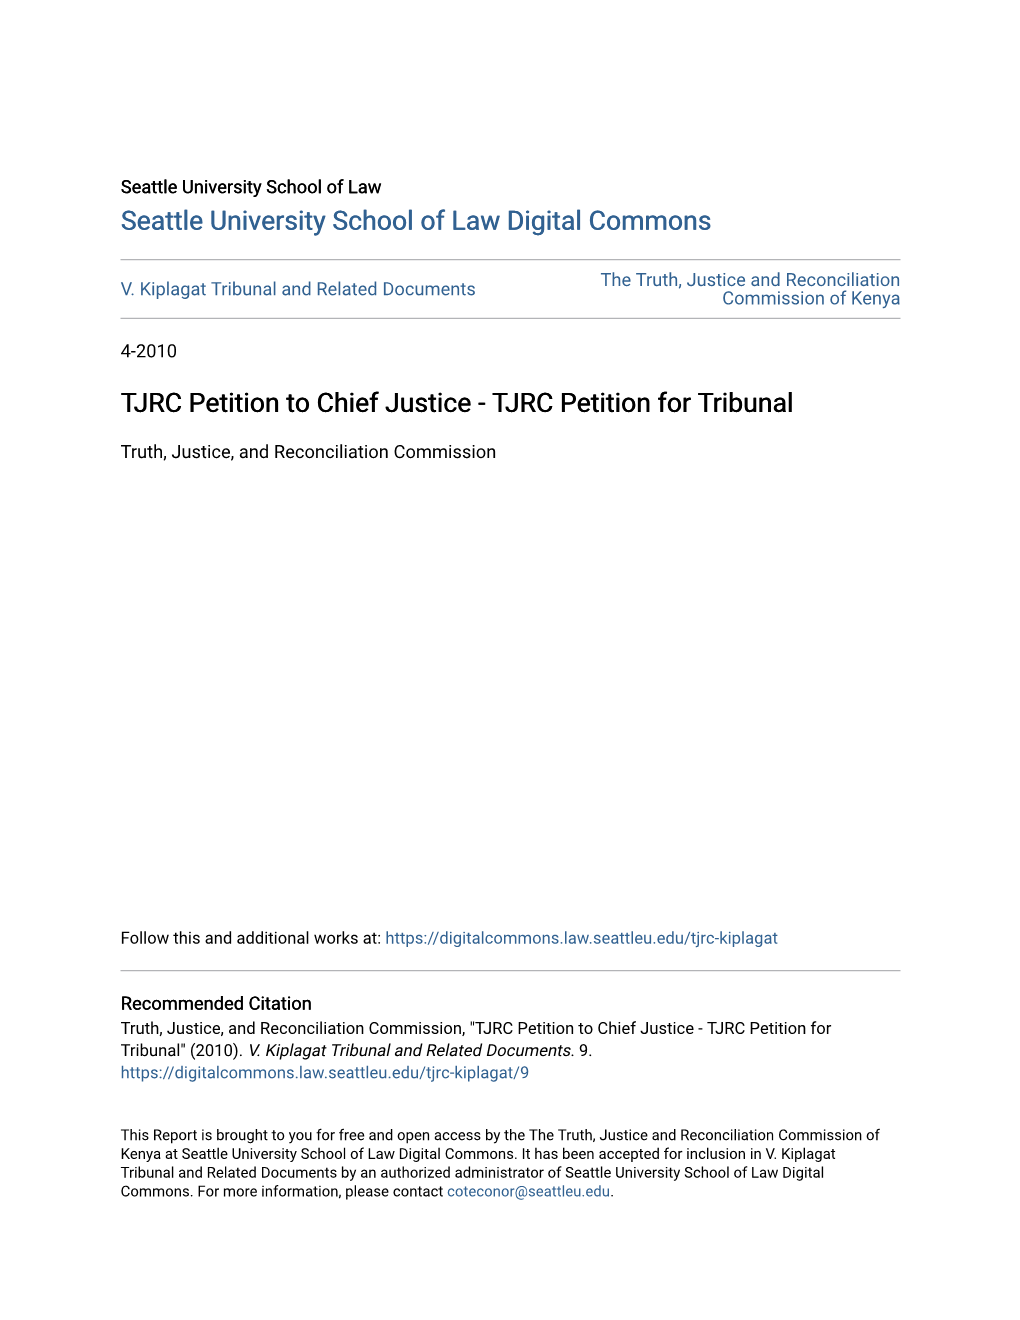 TJRC Petition to Chief Justice - TJRC Petition for Tribunal